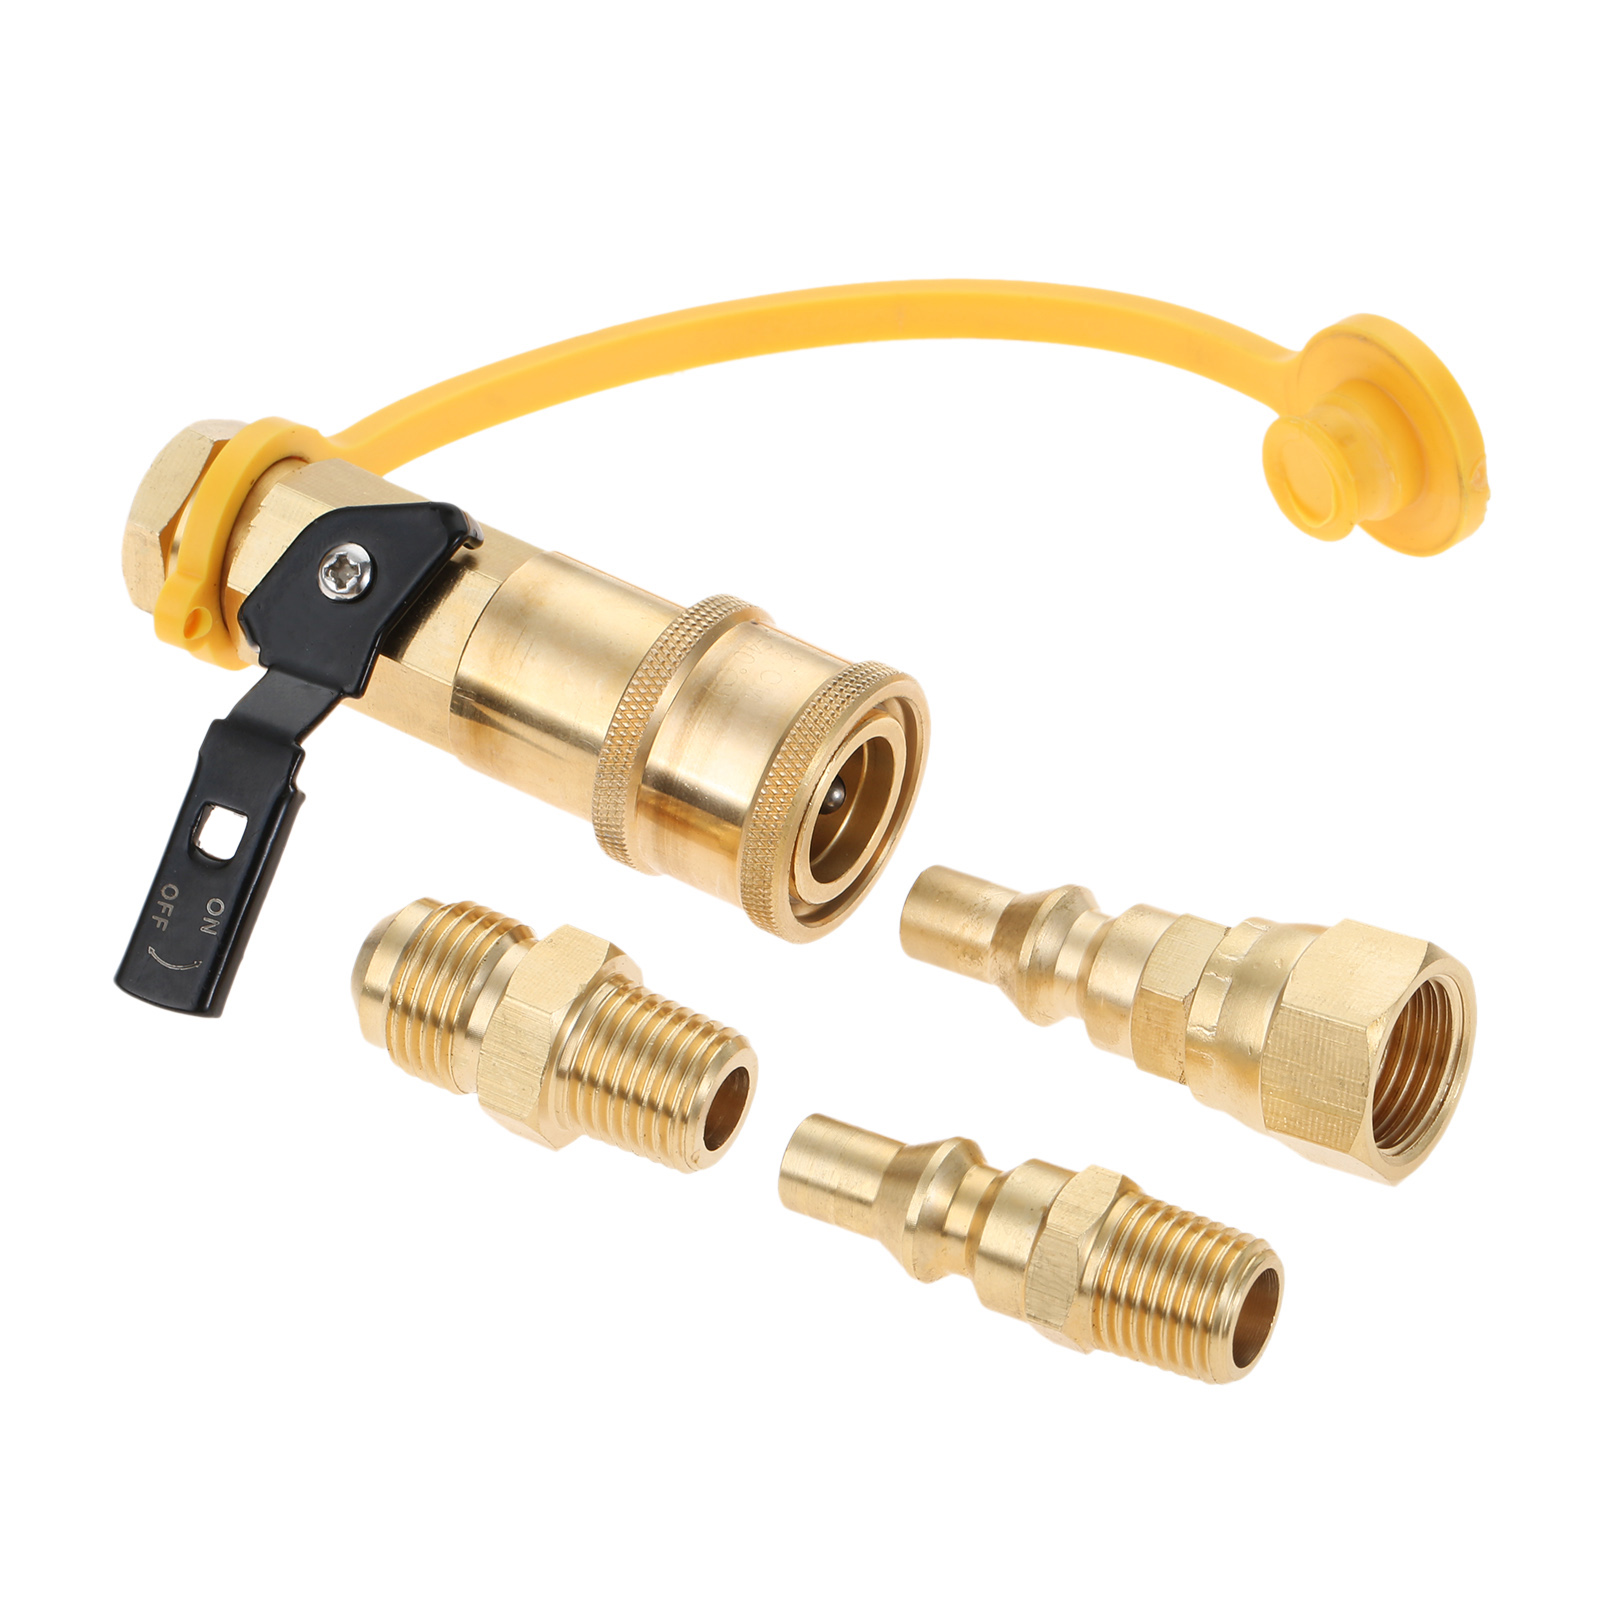 1/4' Propane Gas Connector Quick Connect RV Propane Adapter Kit - China  Propane Refill Tank Adapter, Male Full Flow Plug